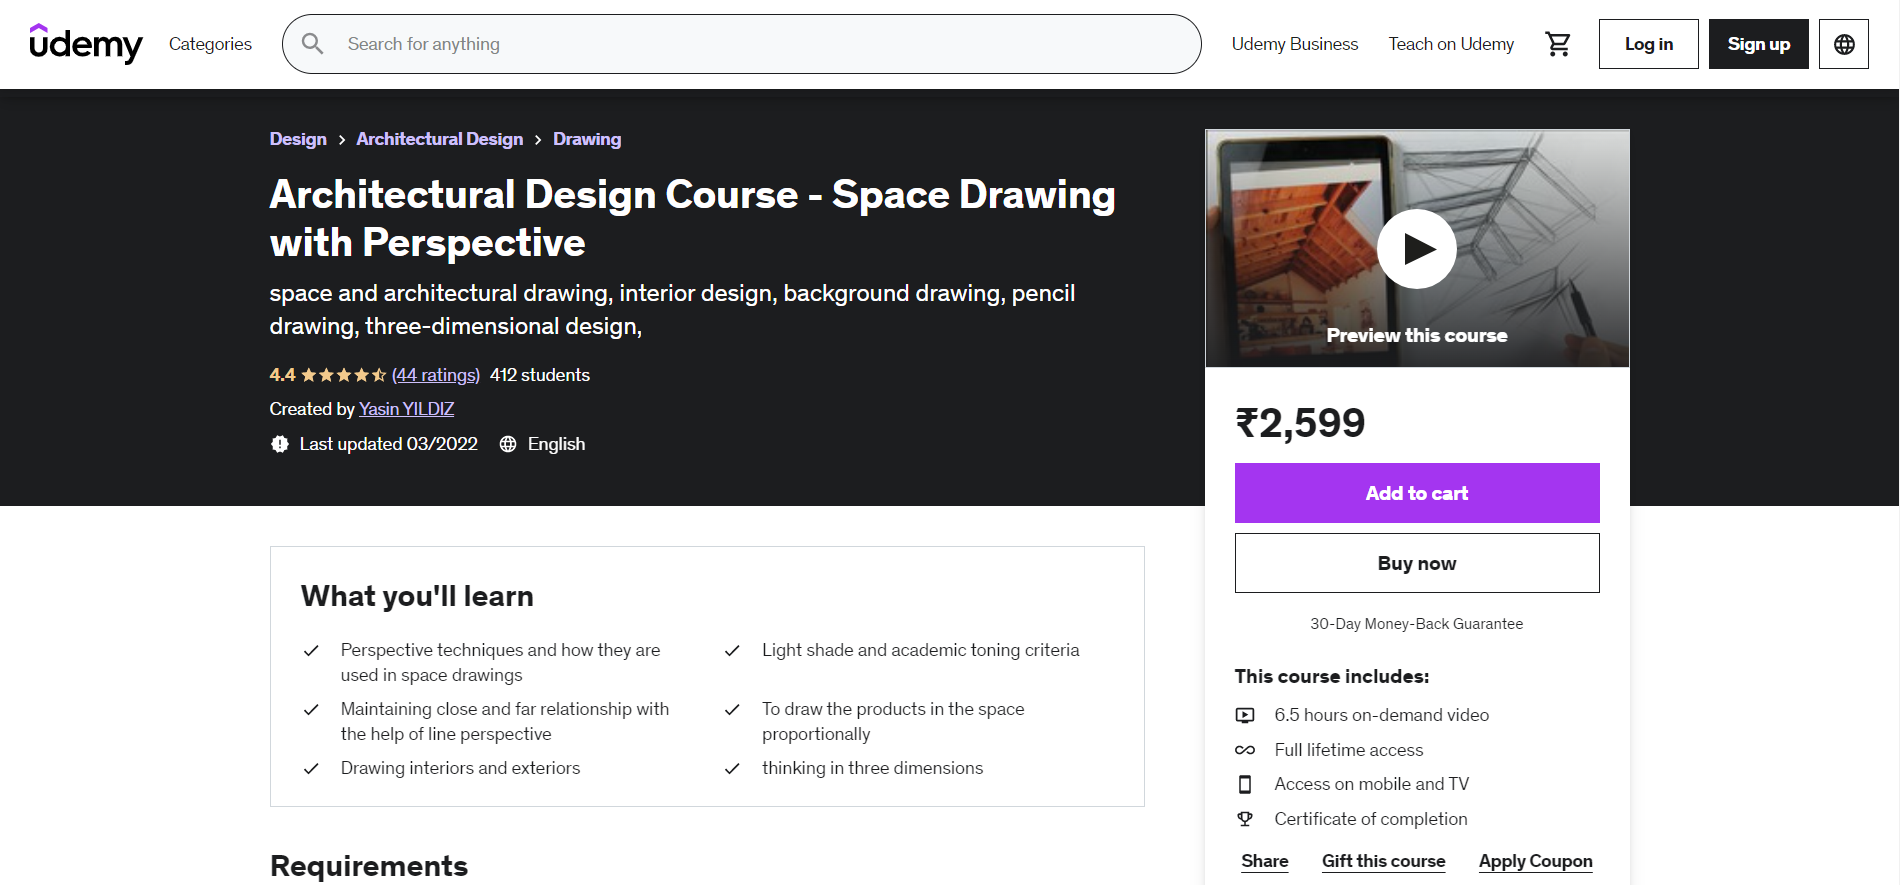 Architectural Design Course - Space Drawing with Perspective